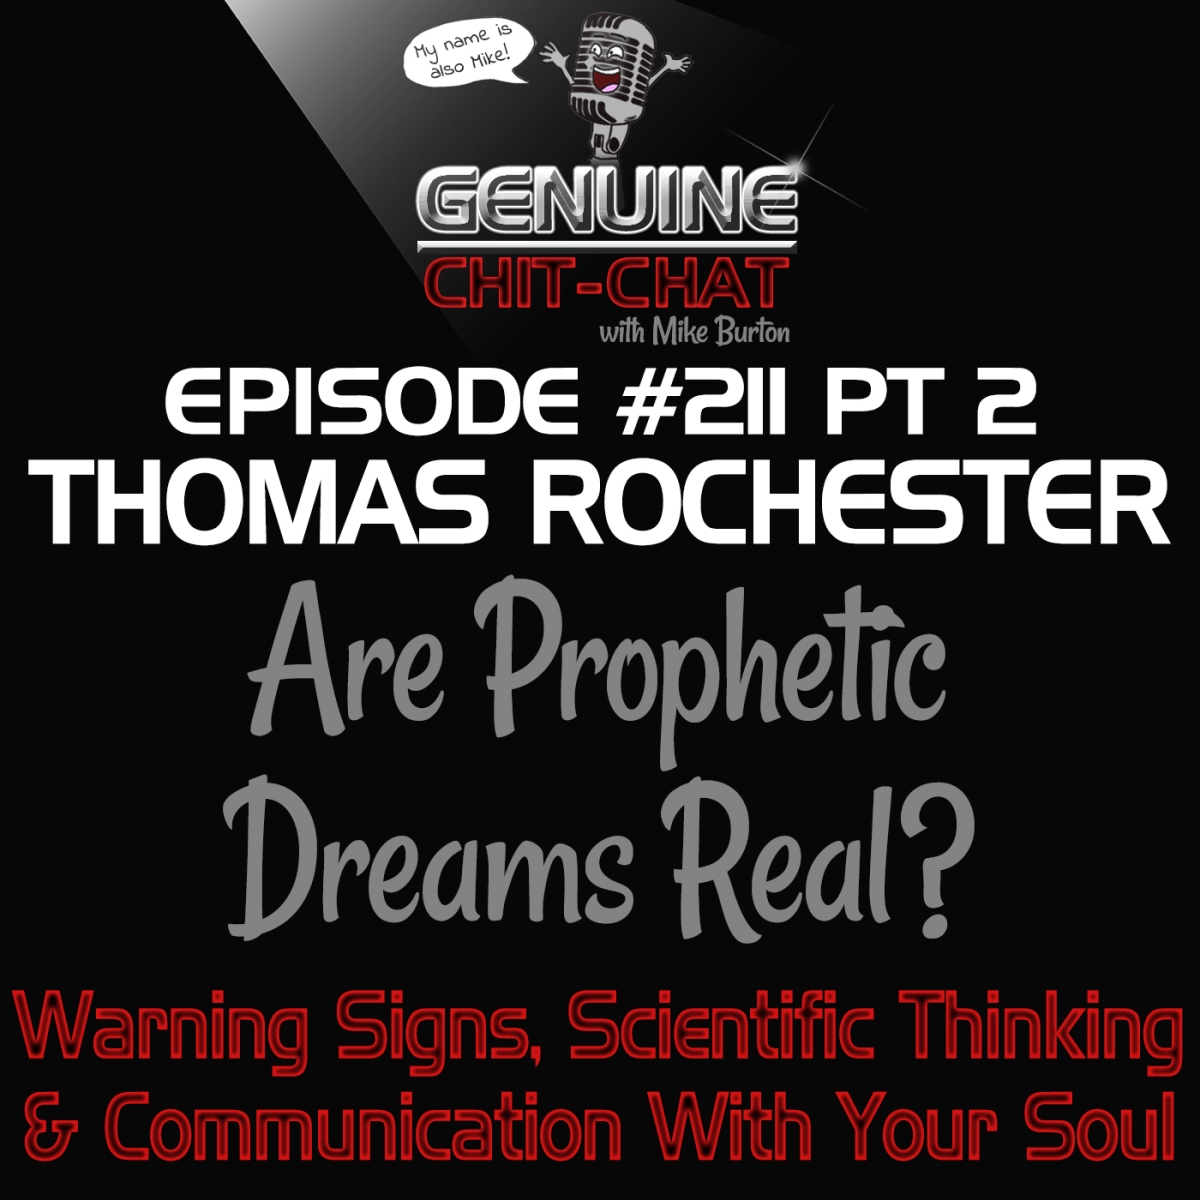 #211 P2 – Are Prophetic Dreams Real? Warning Signs, Scientific Thinking & Communication With Your Soul With Thomas Rochester